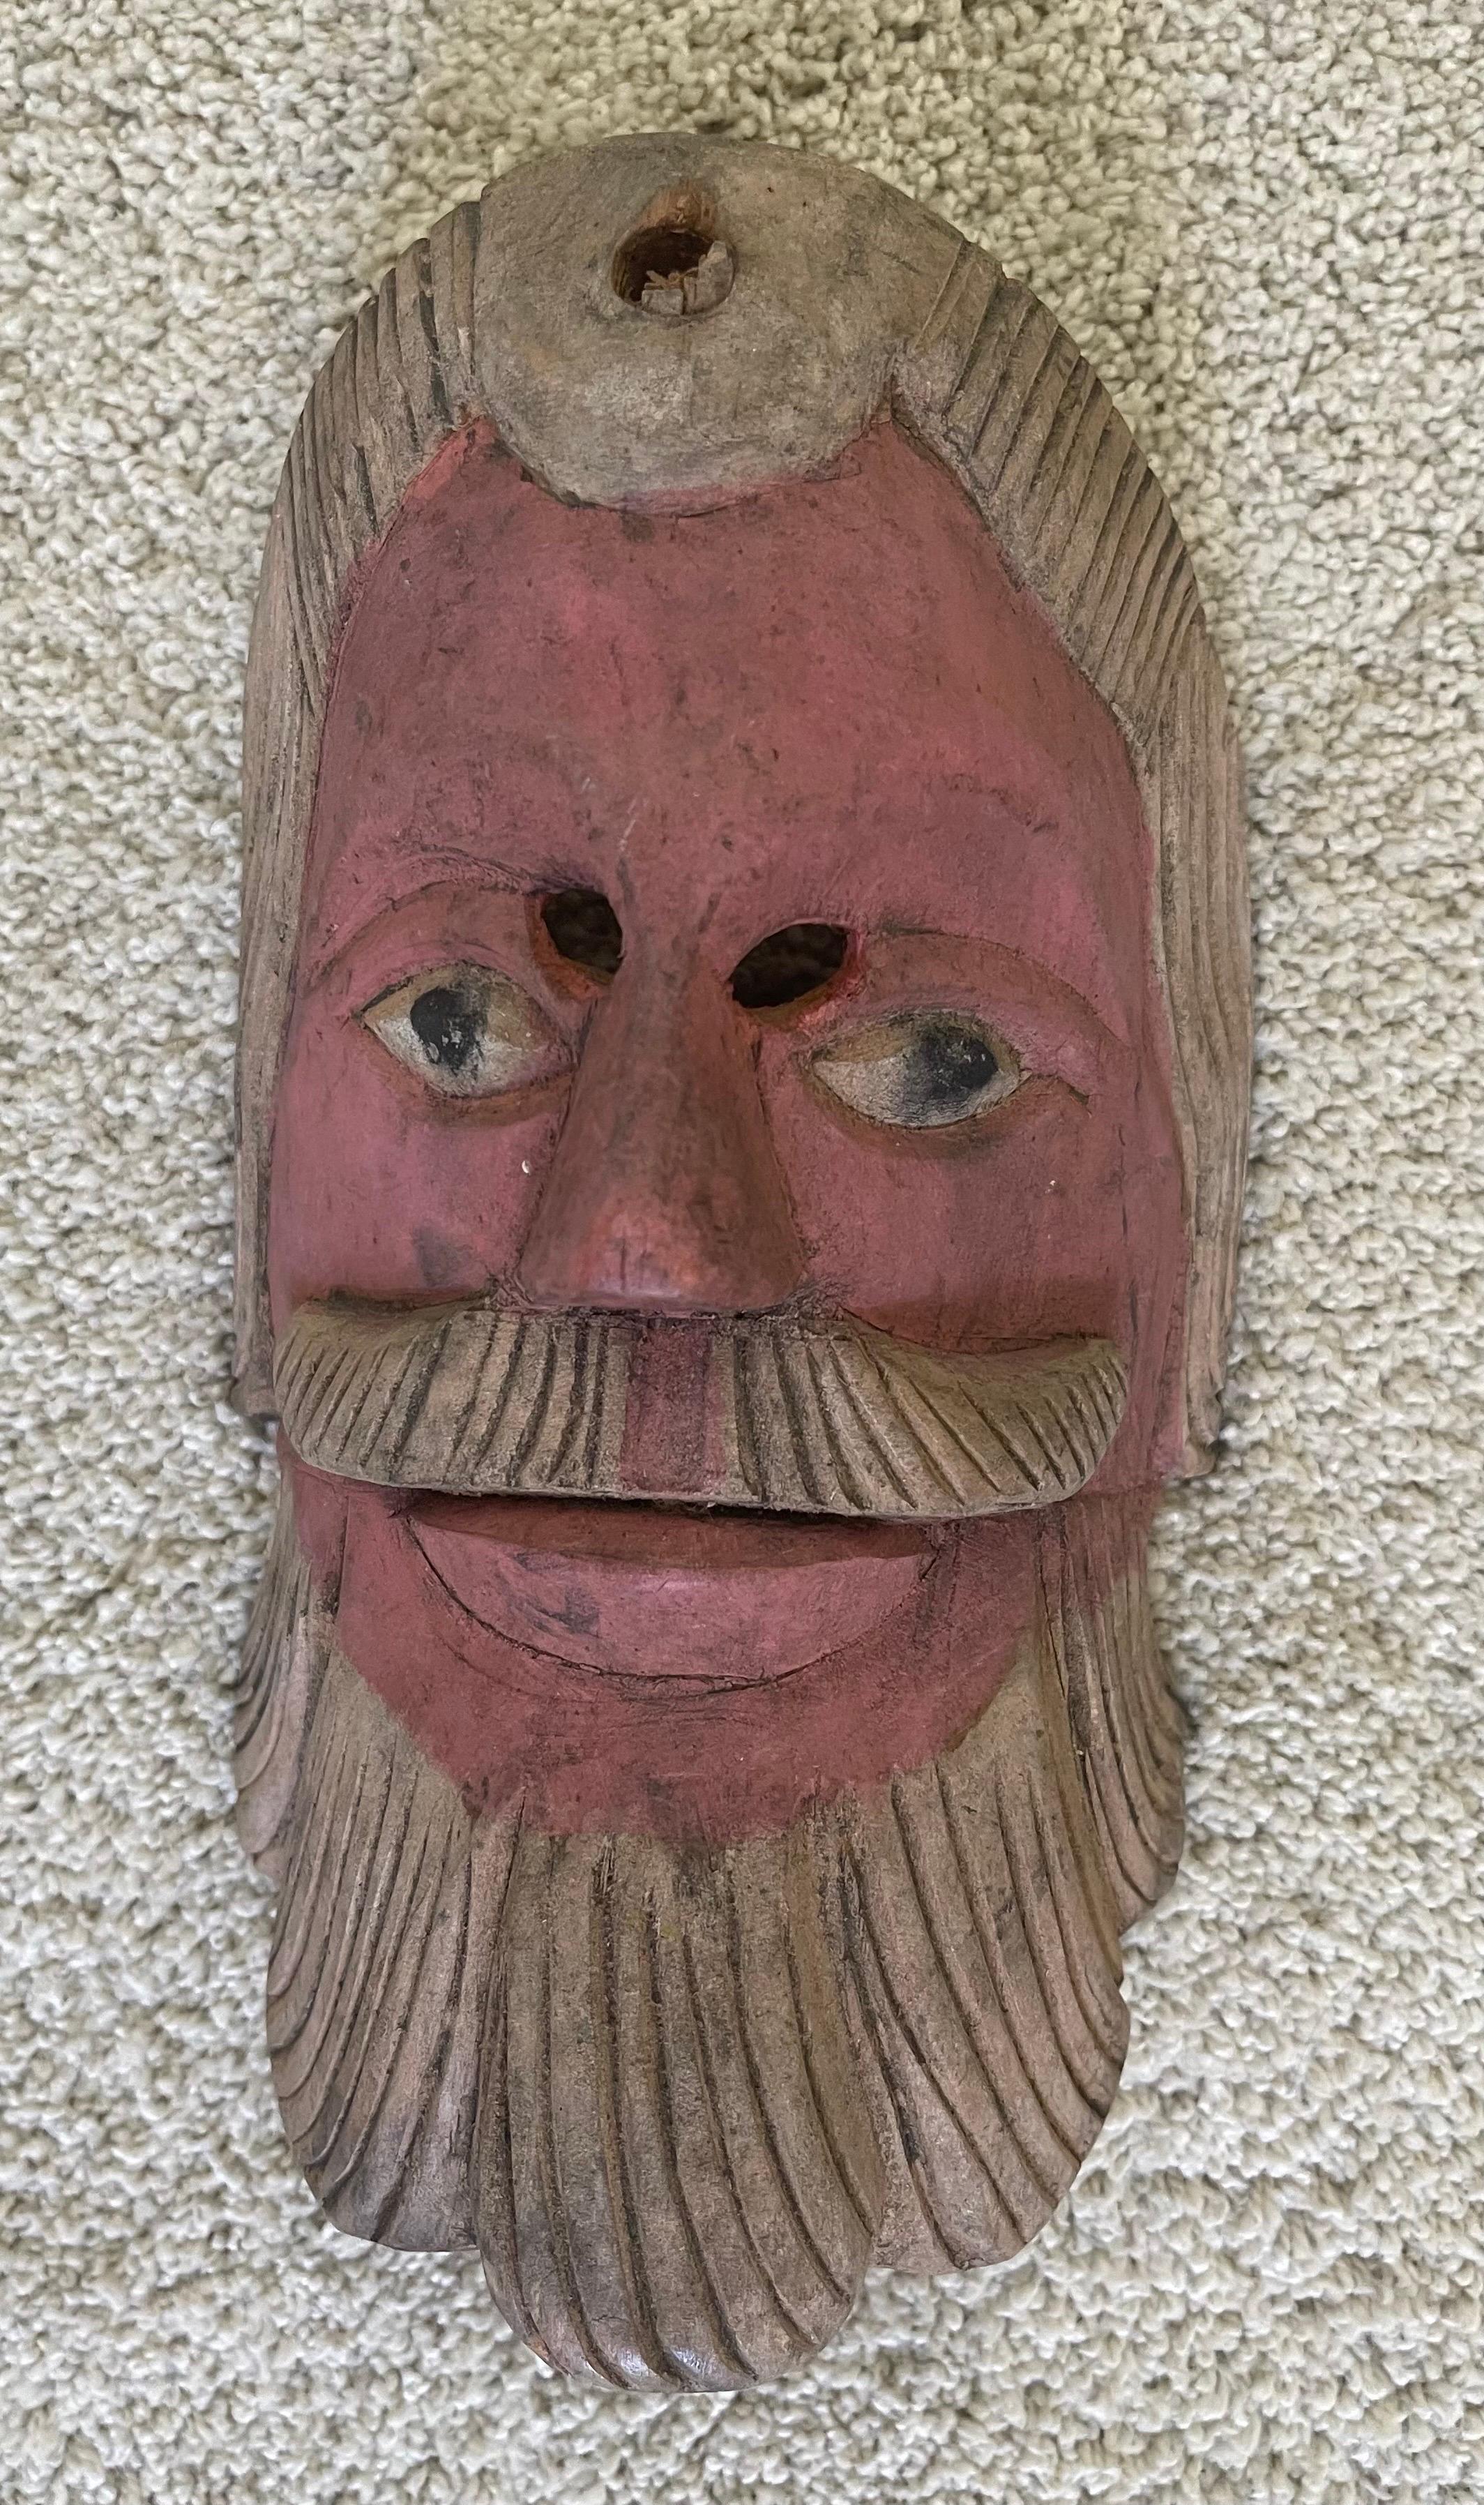 A very fun pair of hand carved wooden folk art masks circa 1940s. The set is in very good vintage condition and has a hanger on the reverse side; the larger mask measures 6.5